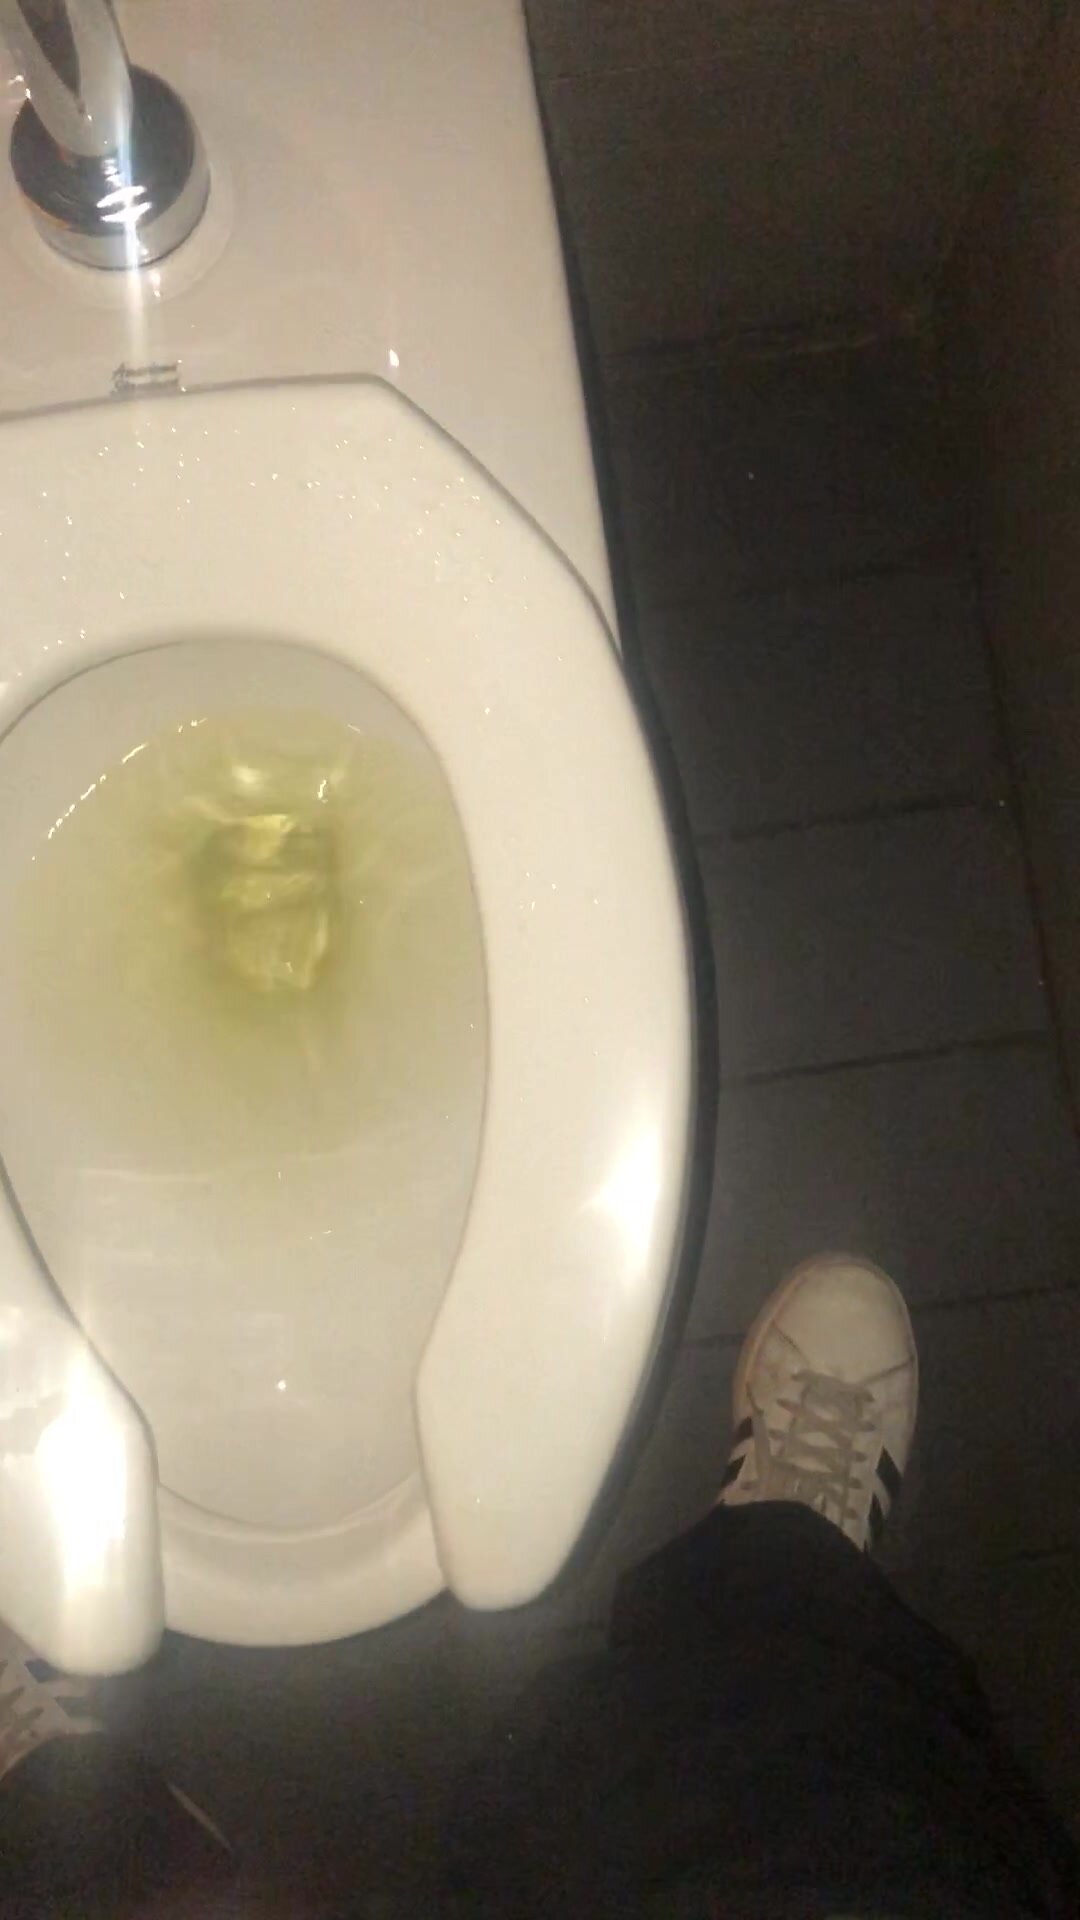 Messy piss in a restaurant restroom